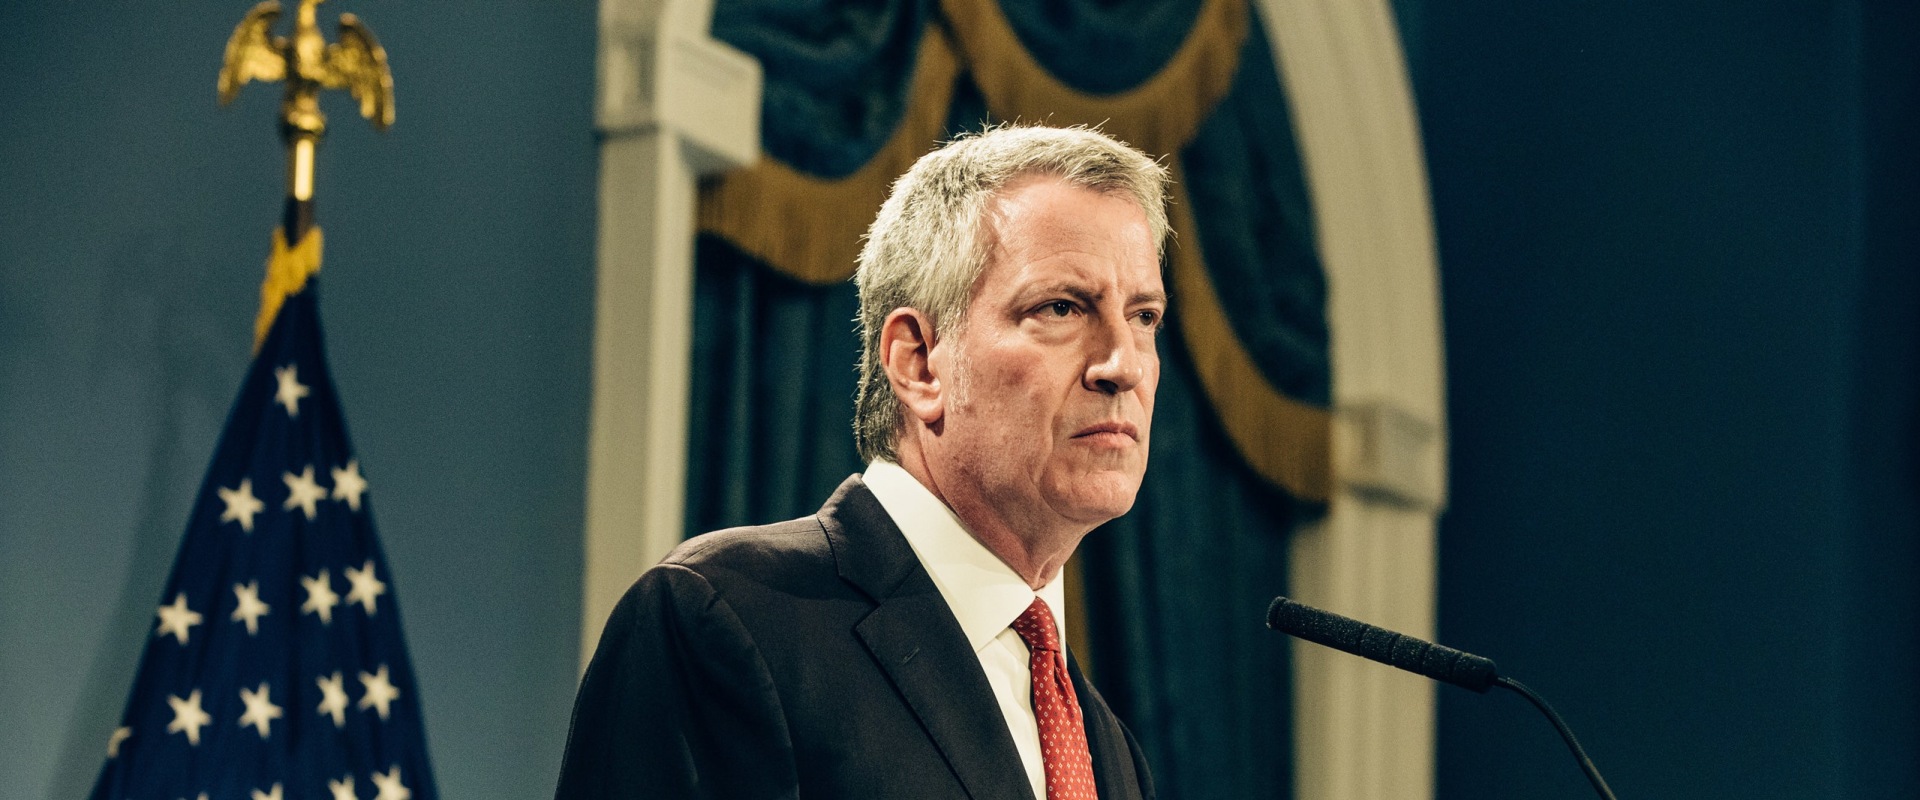 What initiatives did bill de blasio implement during his time as mayor of new york city?